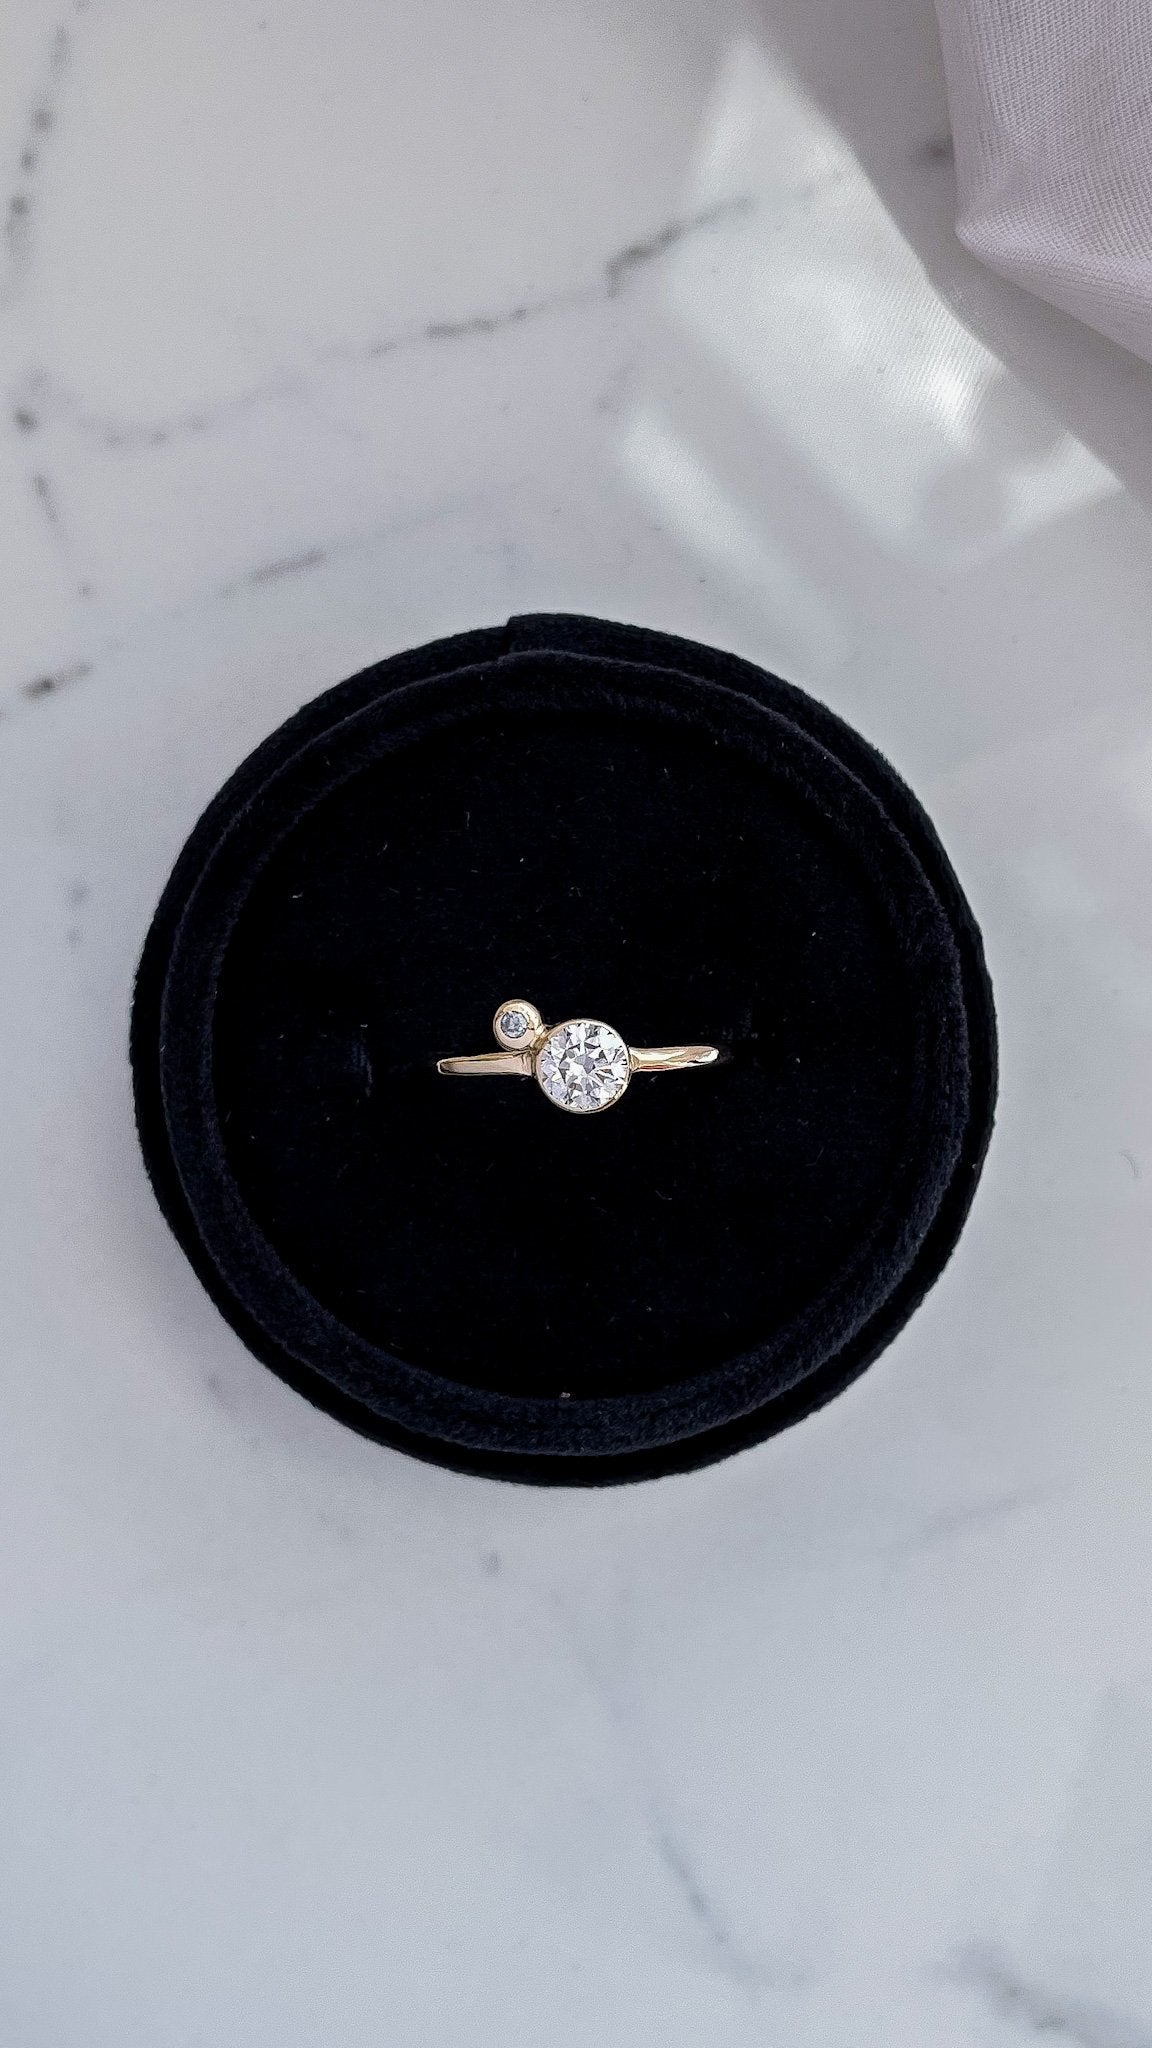 SUN & SELENE handcrafted two stone engagement ring